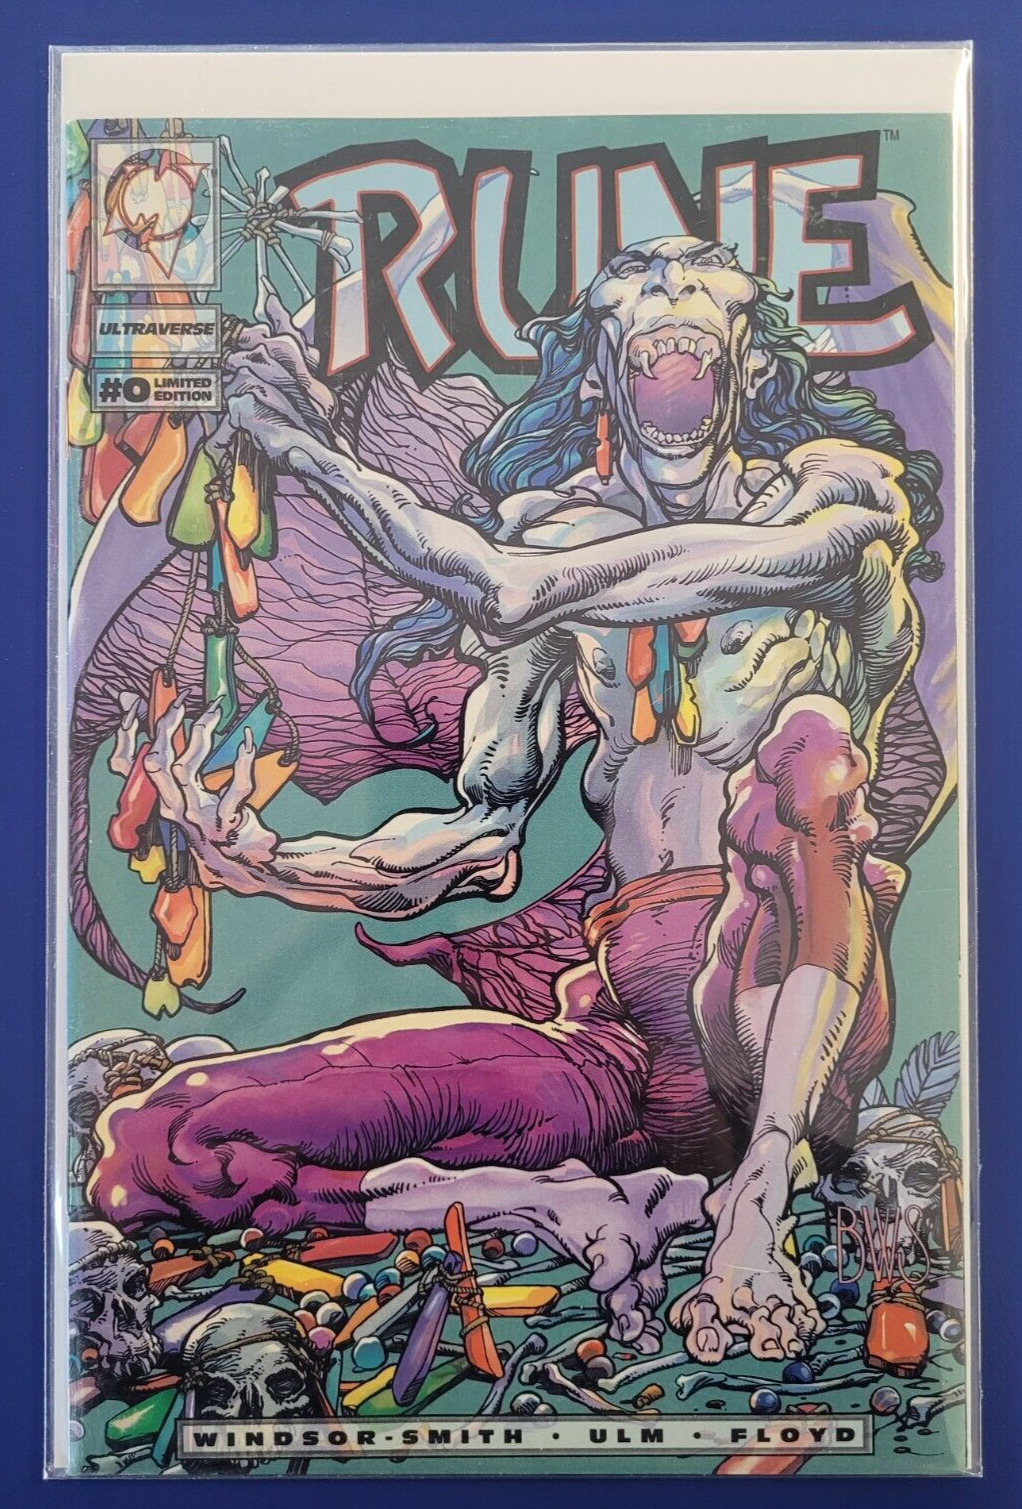 RUNE #0 Limited Edition Barry Windsor Smith Ultraverse Comic